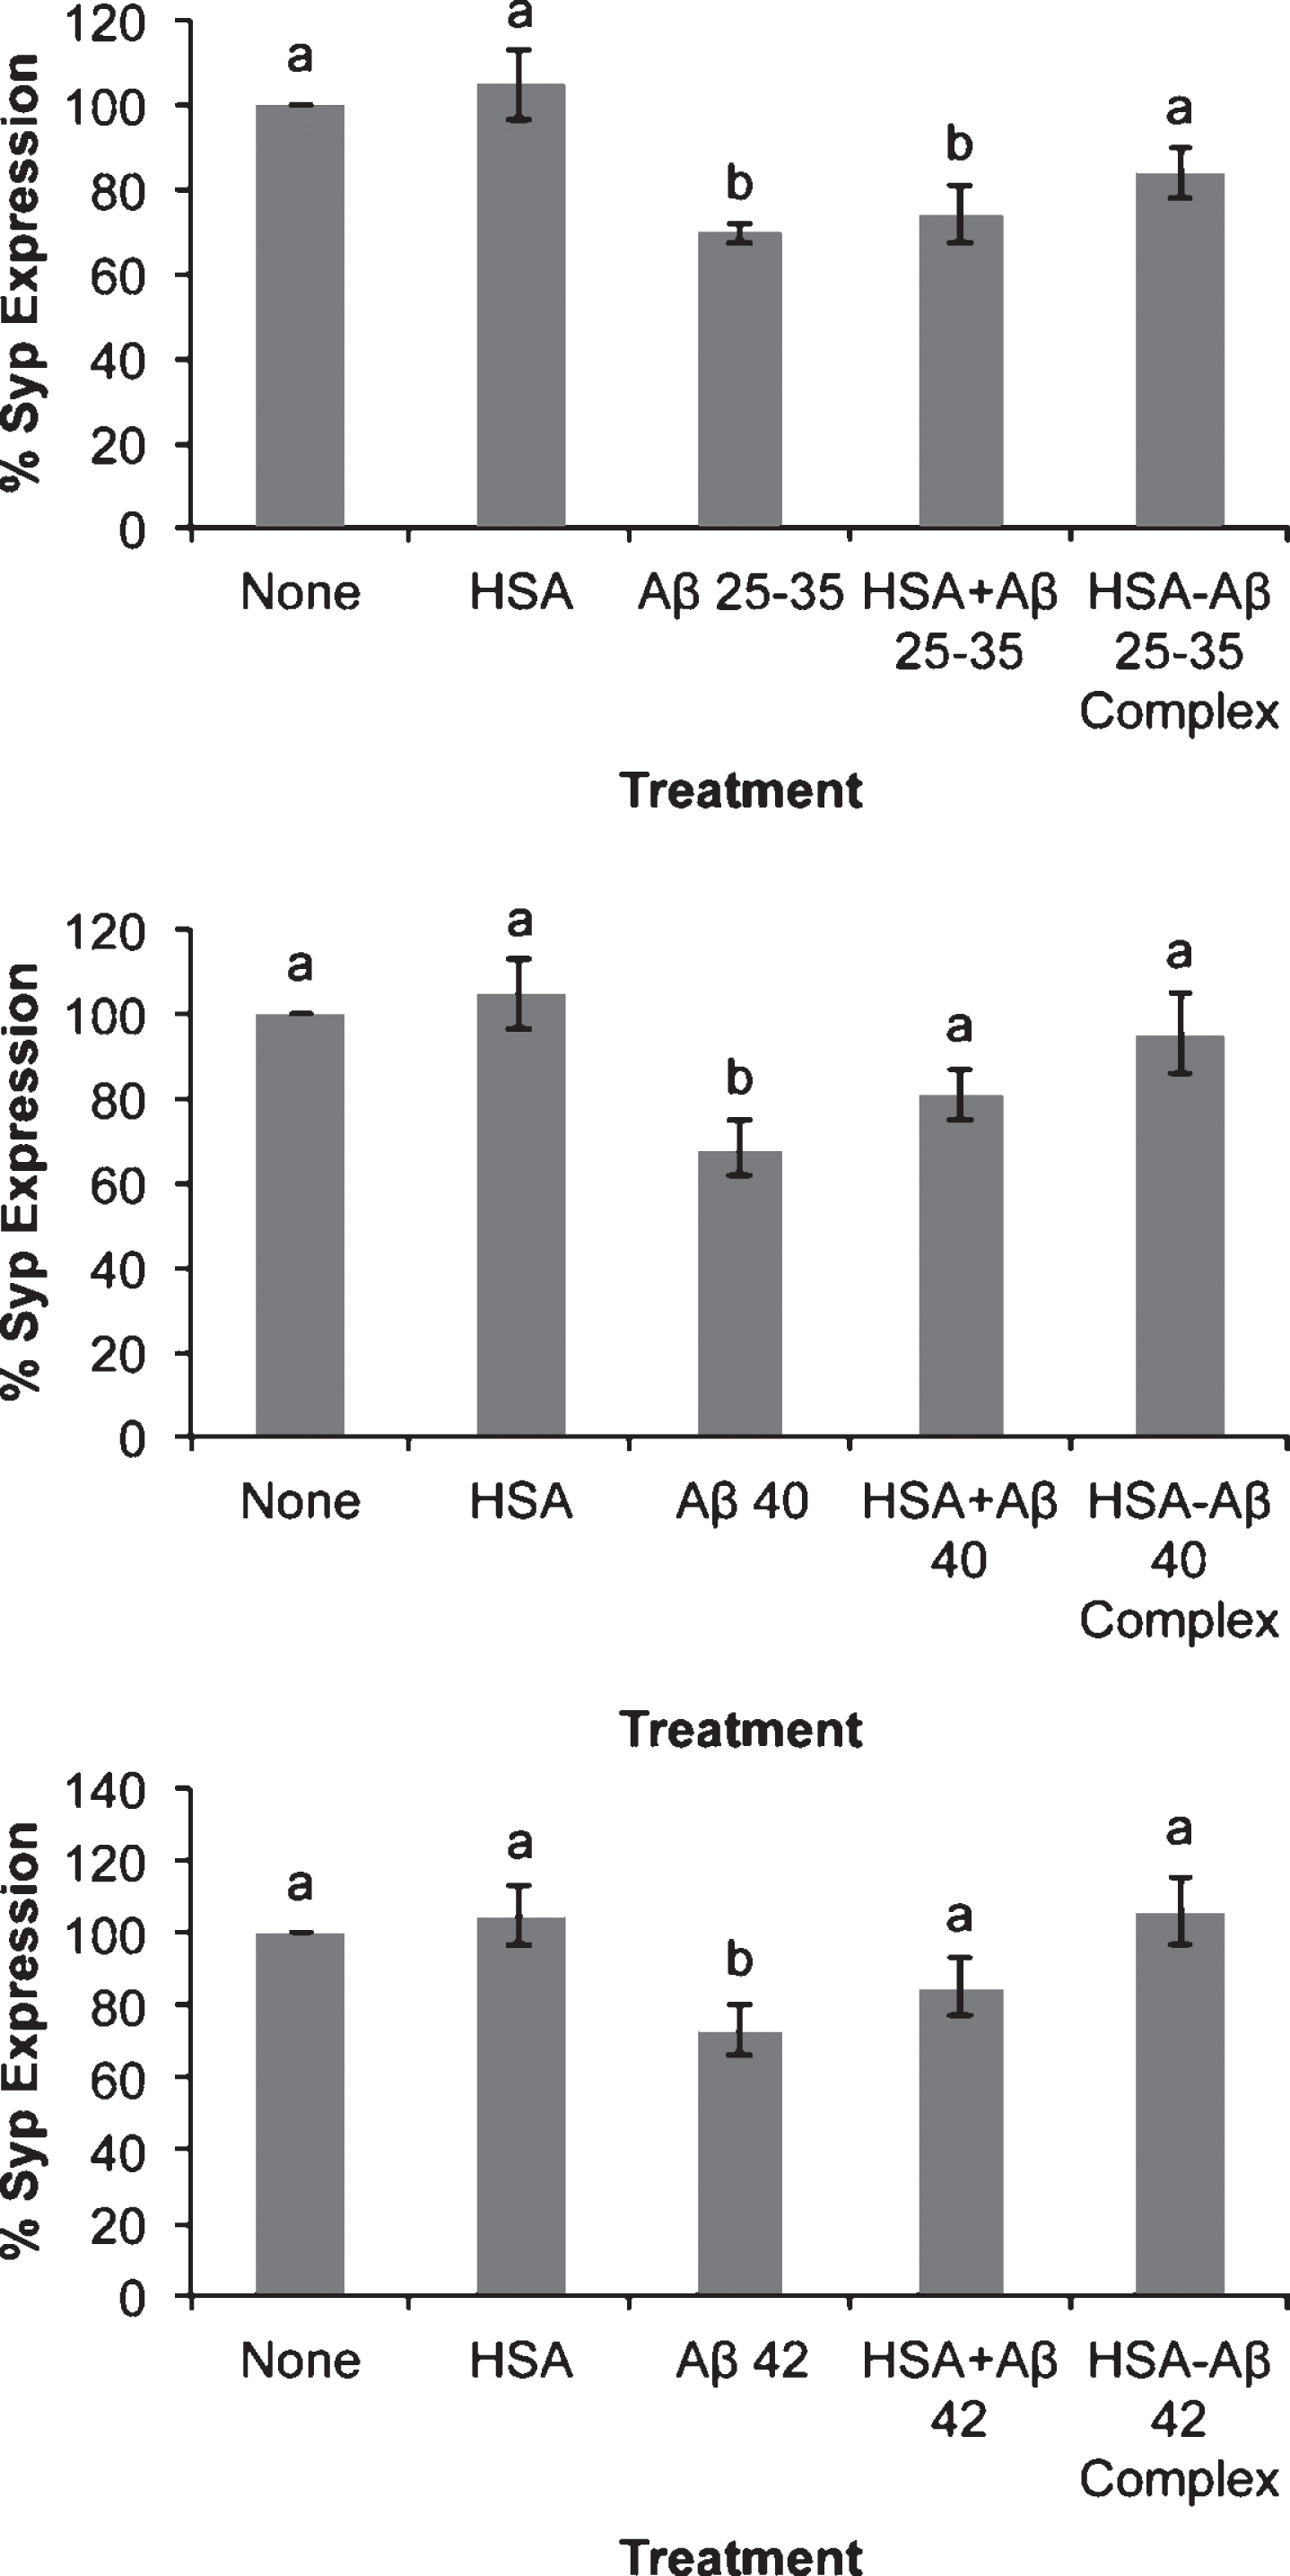 Effect of amyloid-beta peptides on synaptophysin expression in the absence or the presence of HSA. Neurons in primary (3 DIV) culture were incubated for 20 h in DMEM medium with three different Aβ peptides: Aβ25-35, Aβ40, or Aβ42 (30 μM) in the absence or the presence of HSA (30 μM) or as HSA-Aβ complexes (30 μM). Then proteins were obtained and analyzed by western blot. Results are expressed as percentages compared to non-treated cells and are means±SEM (n≥7). One-way ANOVA and Dunnett Test were applied in order to compare different treatments vs. control. Distinct characters are used to indicate statistically different groups as compared to the control (p < 0.05). See Supplementary Figure 2 for raw western blot.